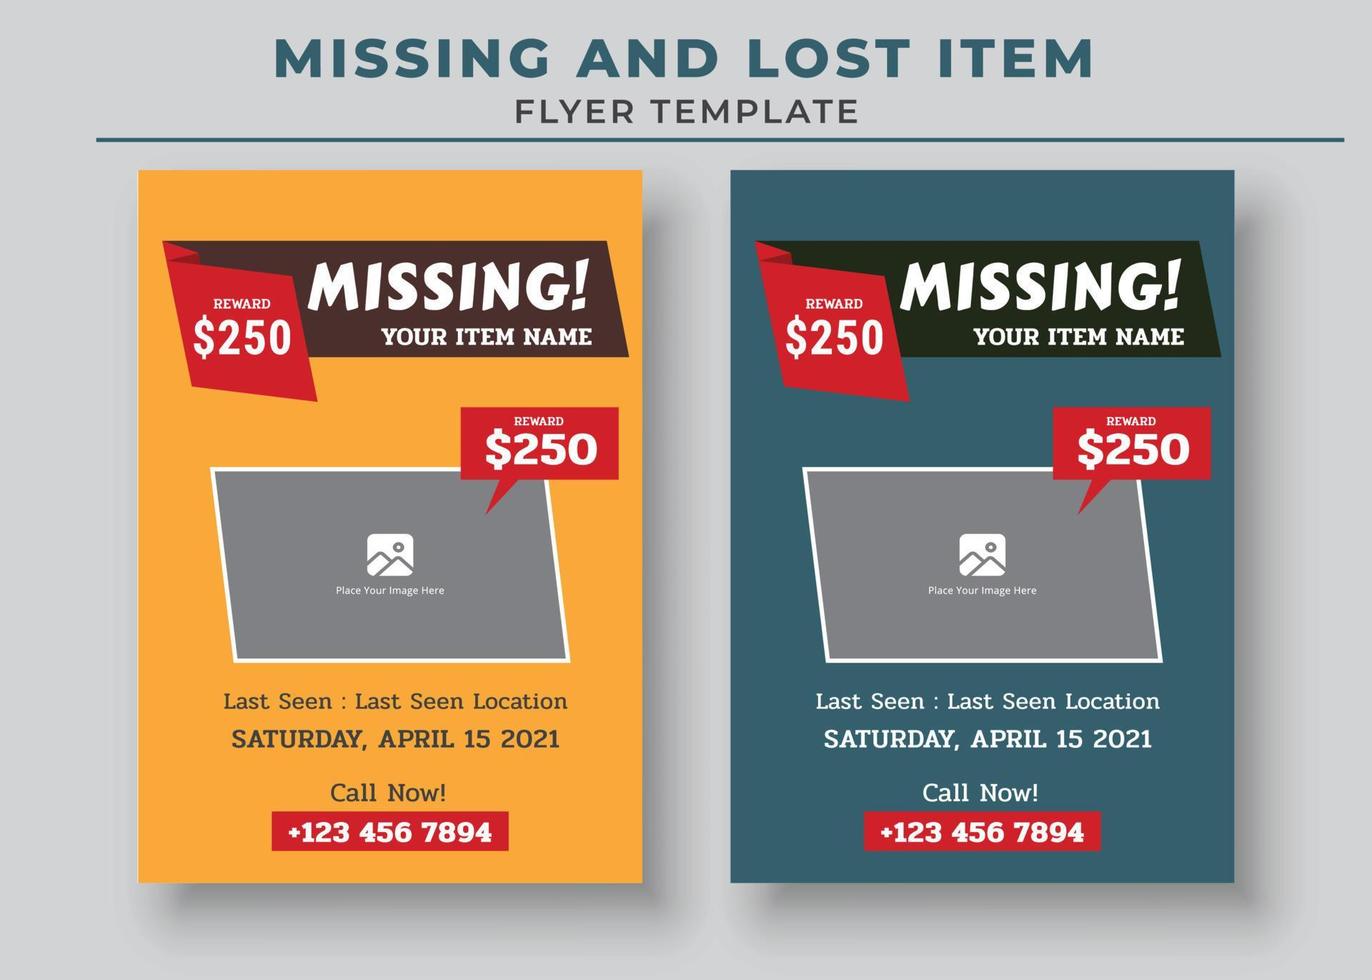 Missing and Lost Item flyer Template, Missing poster, Lost pet flyer template vector